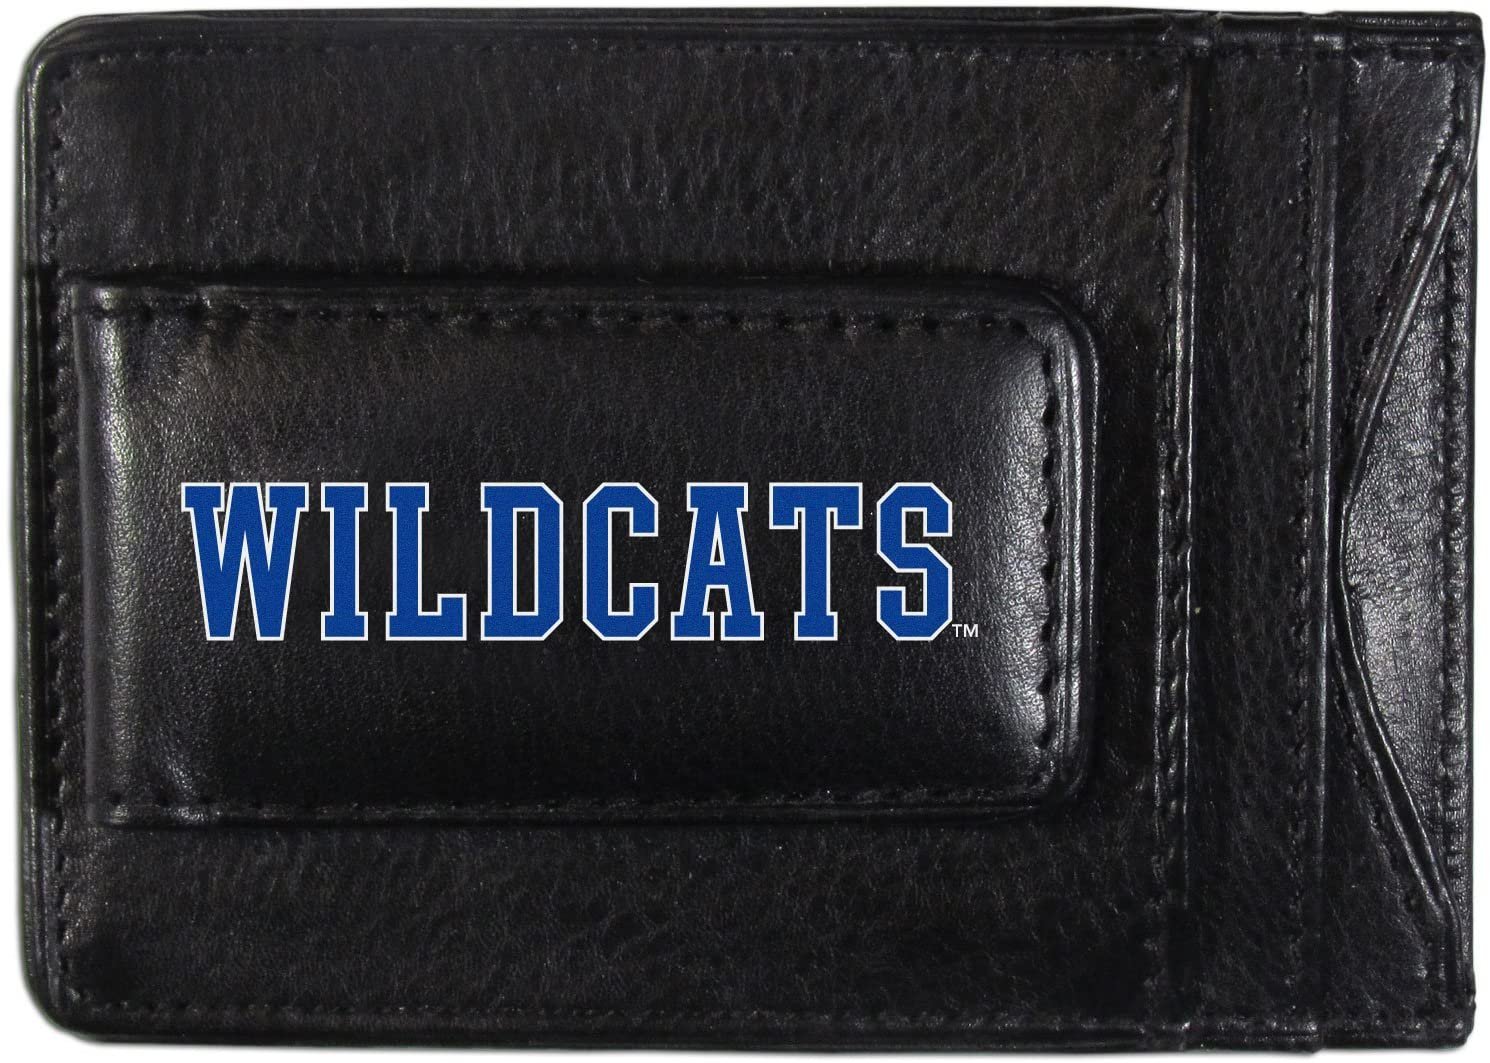 University of Kentucky Wildcats Black Leather Wallet, Front Pocket Magnetic Money Clip, Printed Logo